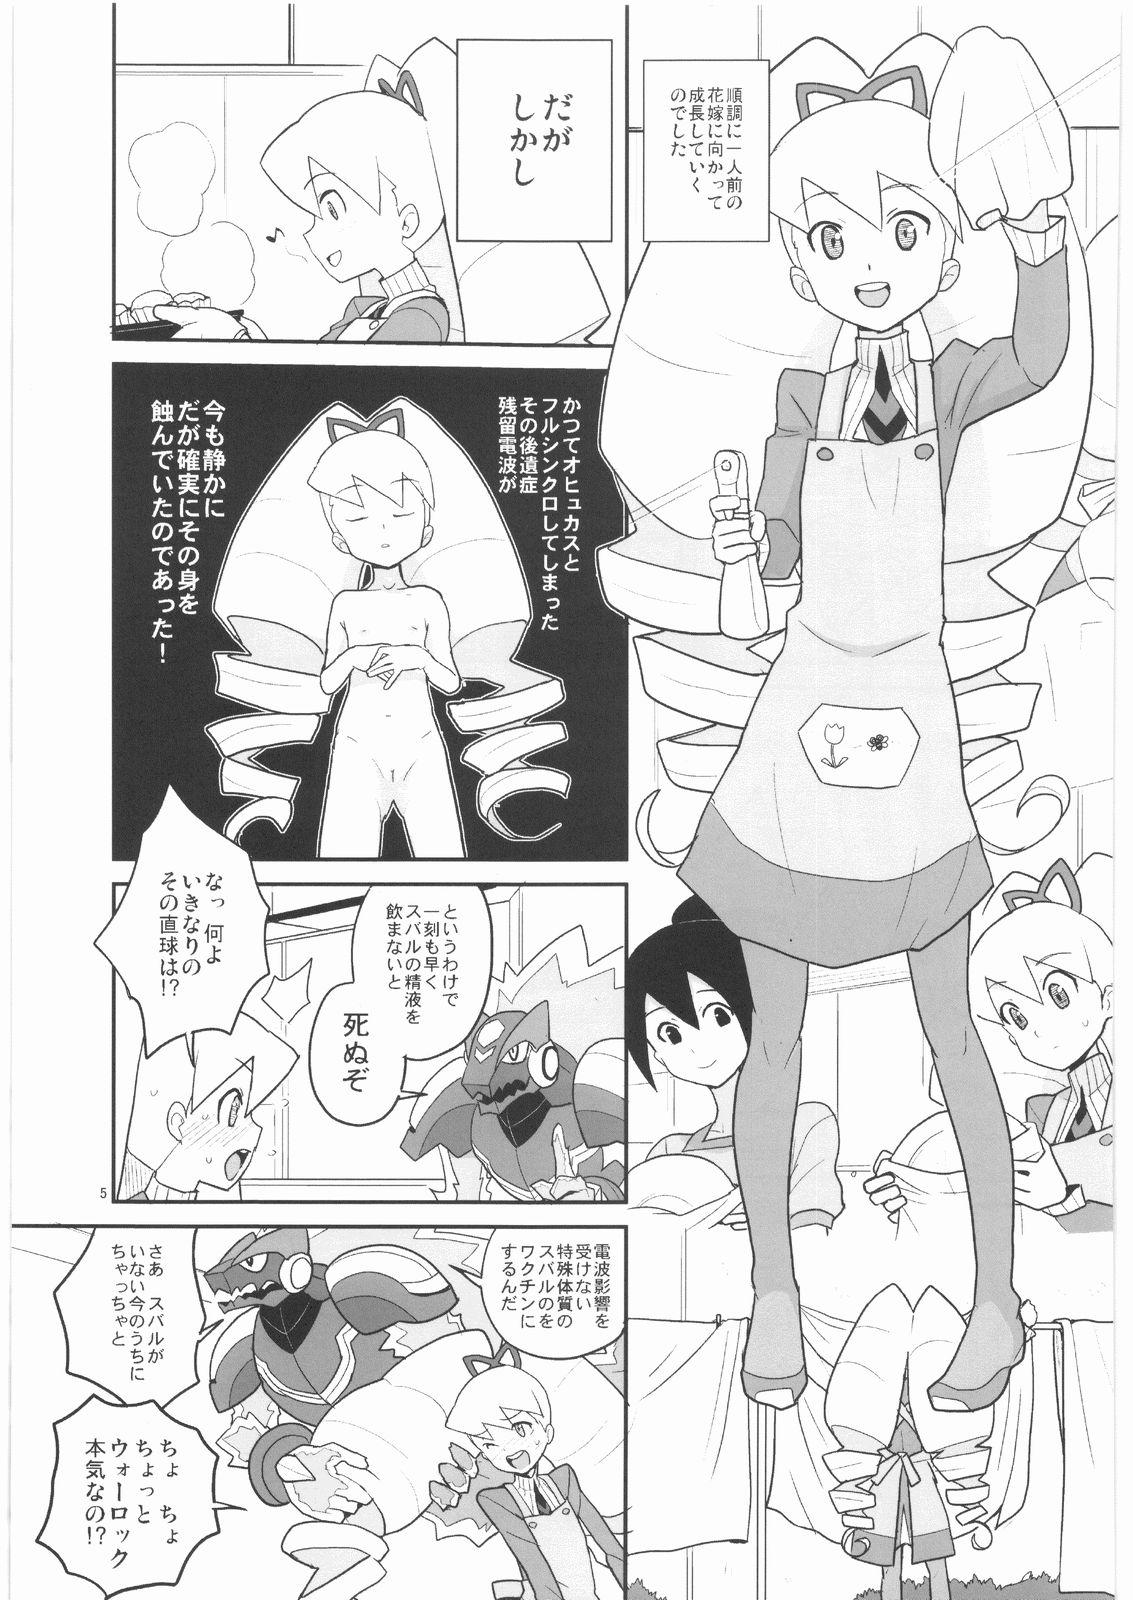 Pussy Orgasm Drill to Tights to Iinchou! - Megaman Mega man star force Gay Pawn - Page 4